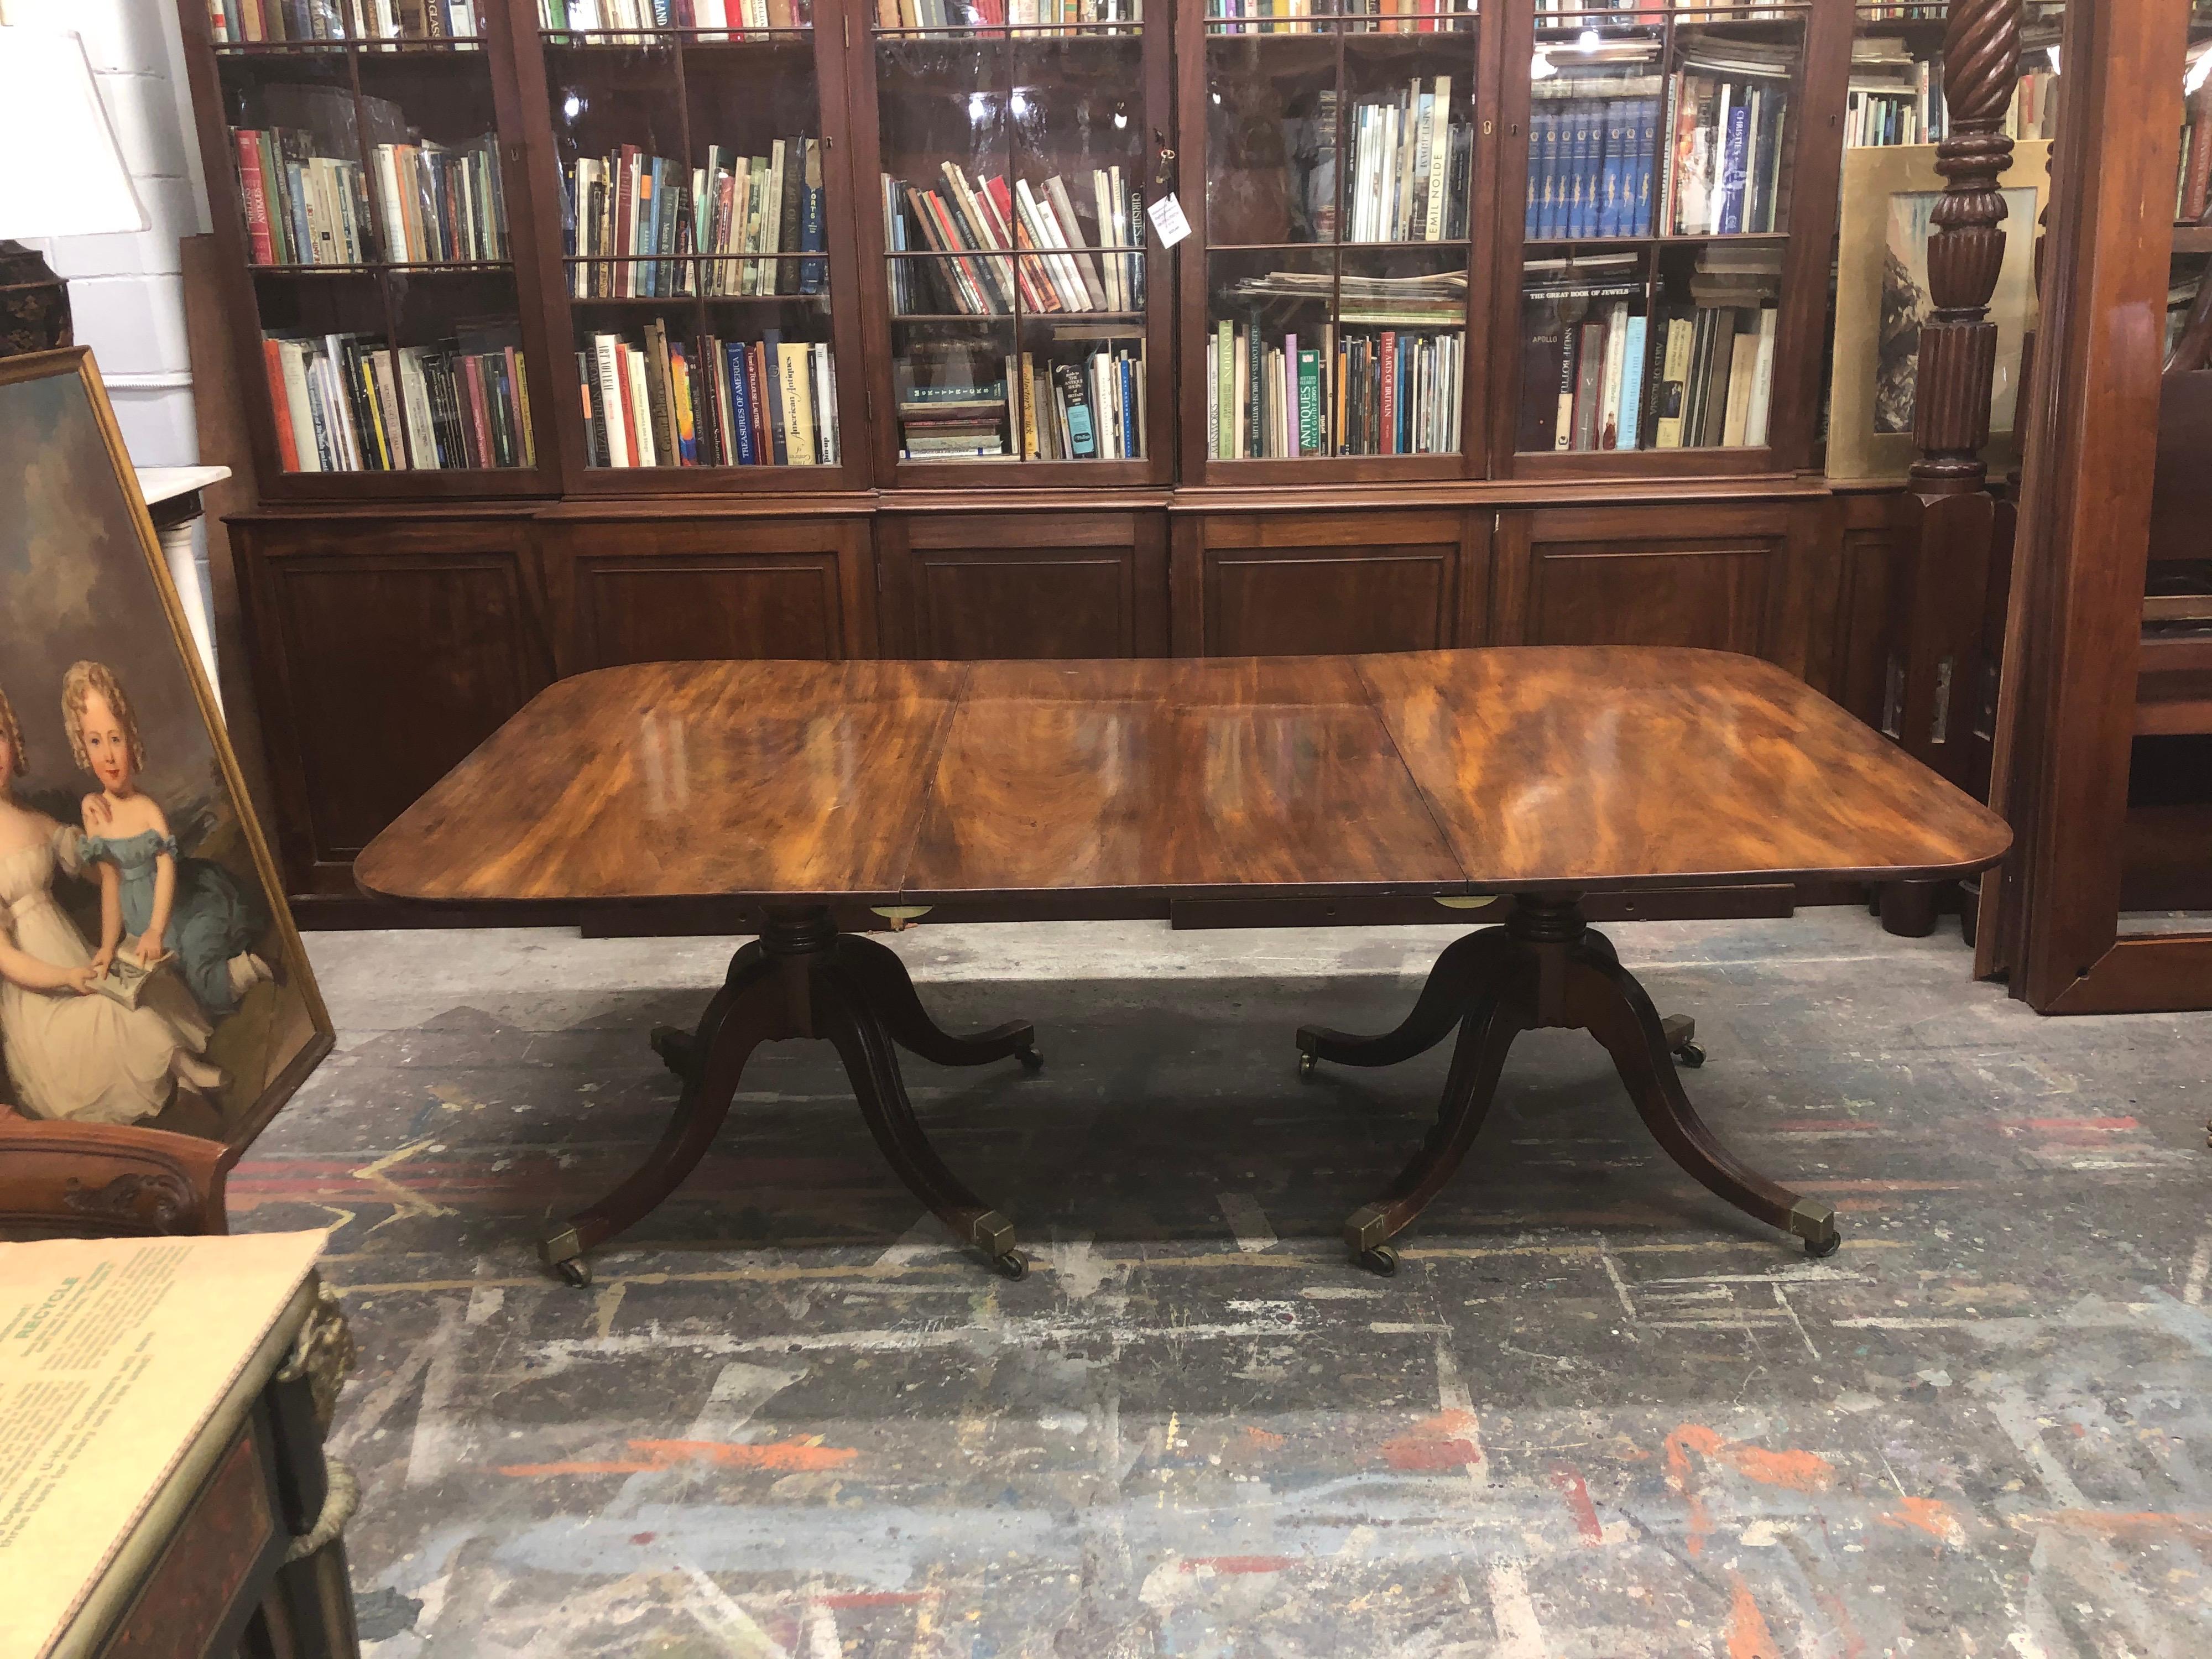 This elegant English Neoclassical double pedestal dining room table has a solid mahogany one board top on each of the pedestal ends and leaf. The original turned pedestals have an urn with rings above and are supported by four mahogany double carved